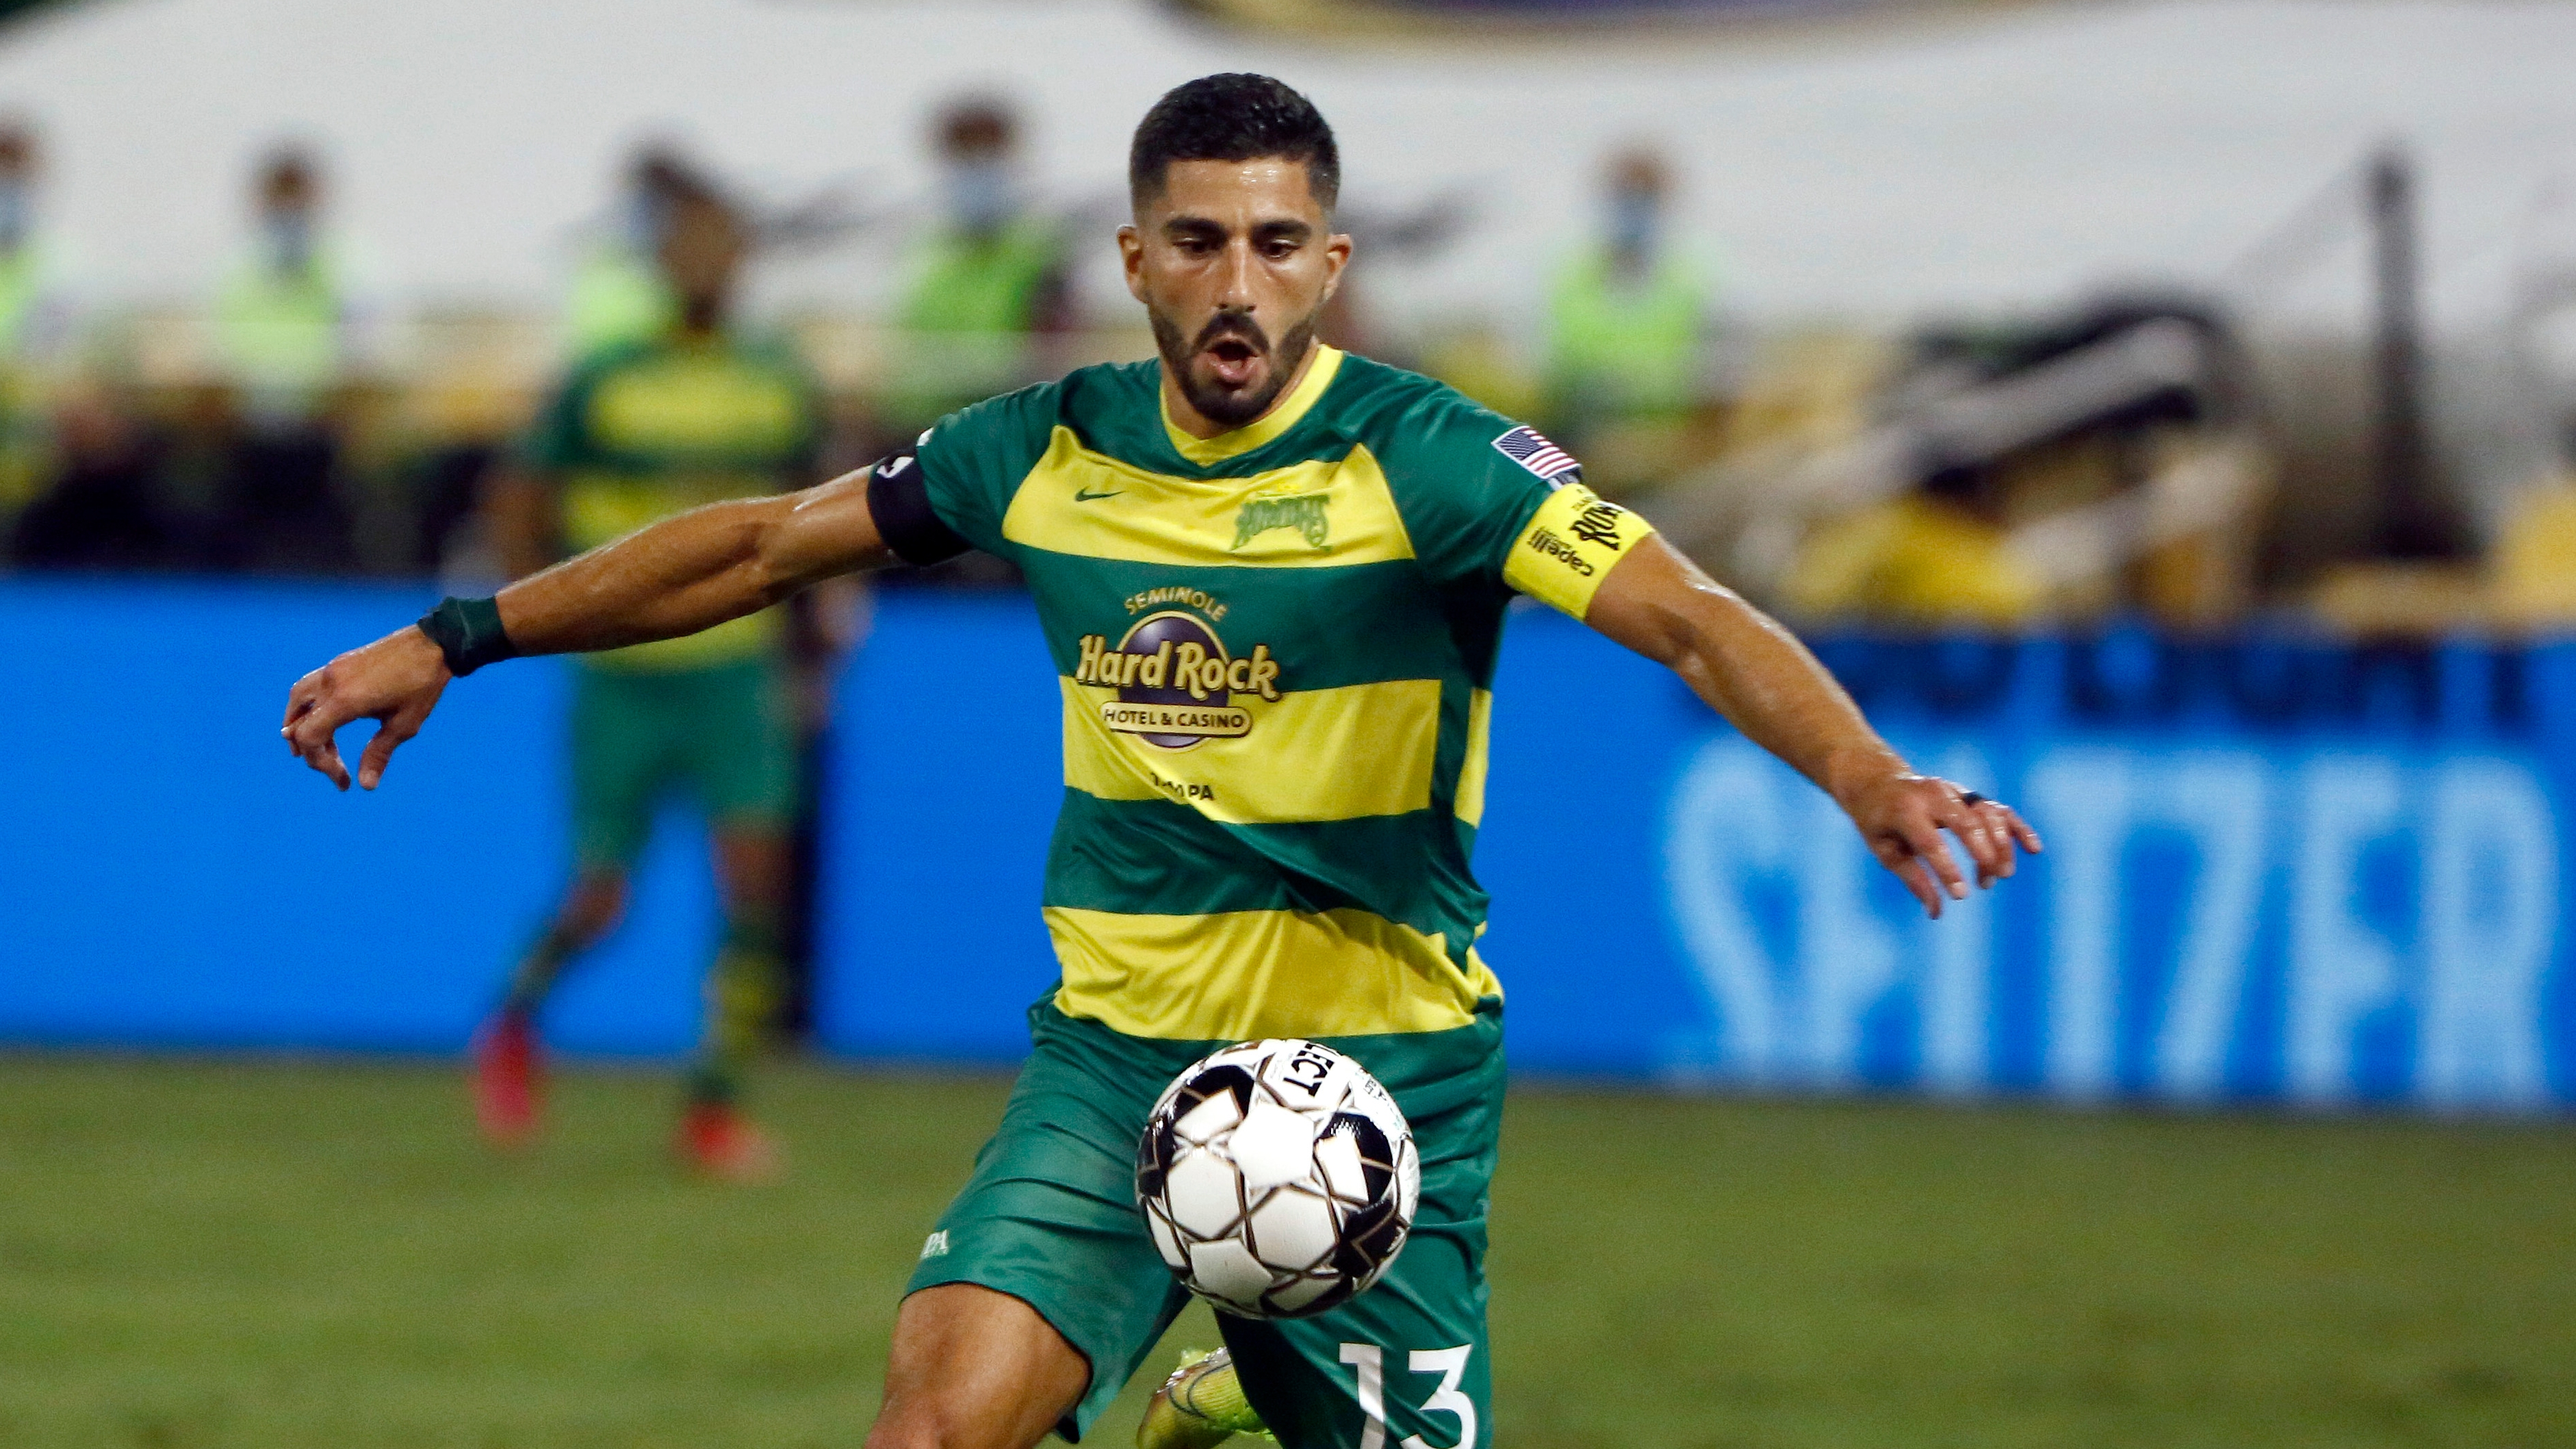 Rowdies eager to defend their conference championship